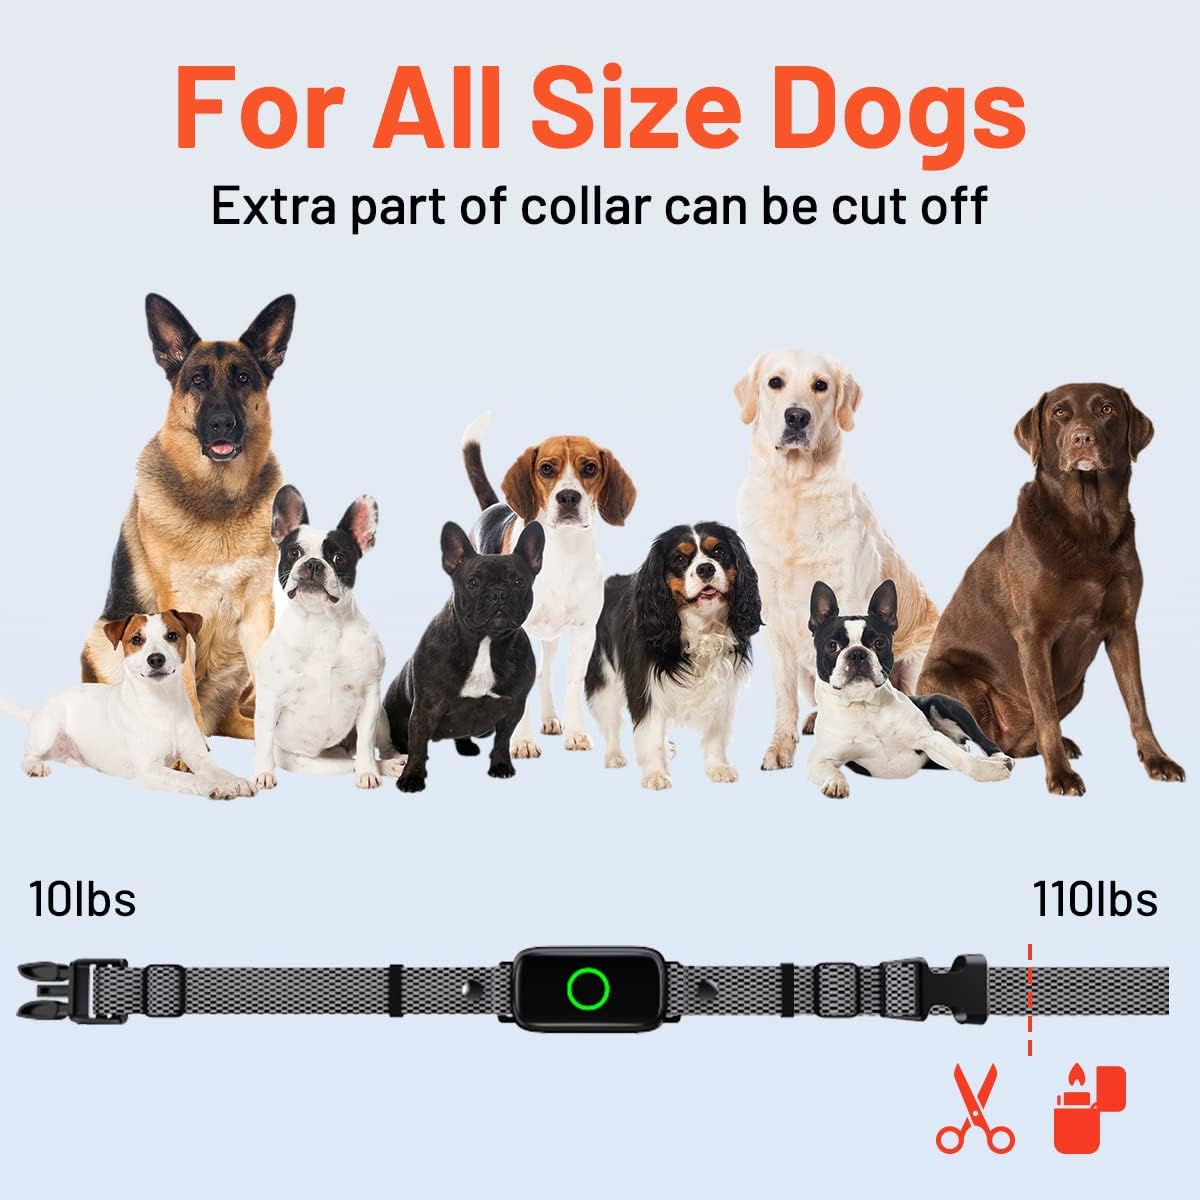 LetsWill Shock Collar Dog Training Collar with Remote 3300ft Range Waterproof E Collar Rechargeable Electric Dog Shock Collar for Small Medium Large Dogs with Beep Vibration Shock and Light Dog Collar